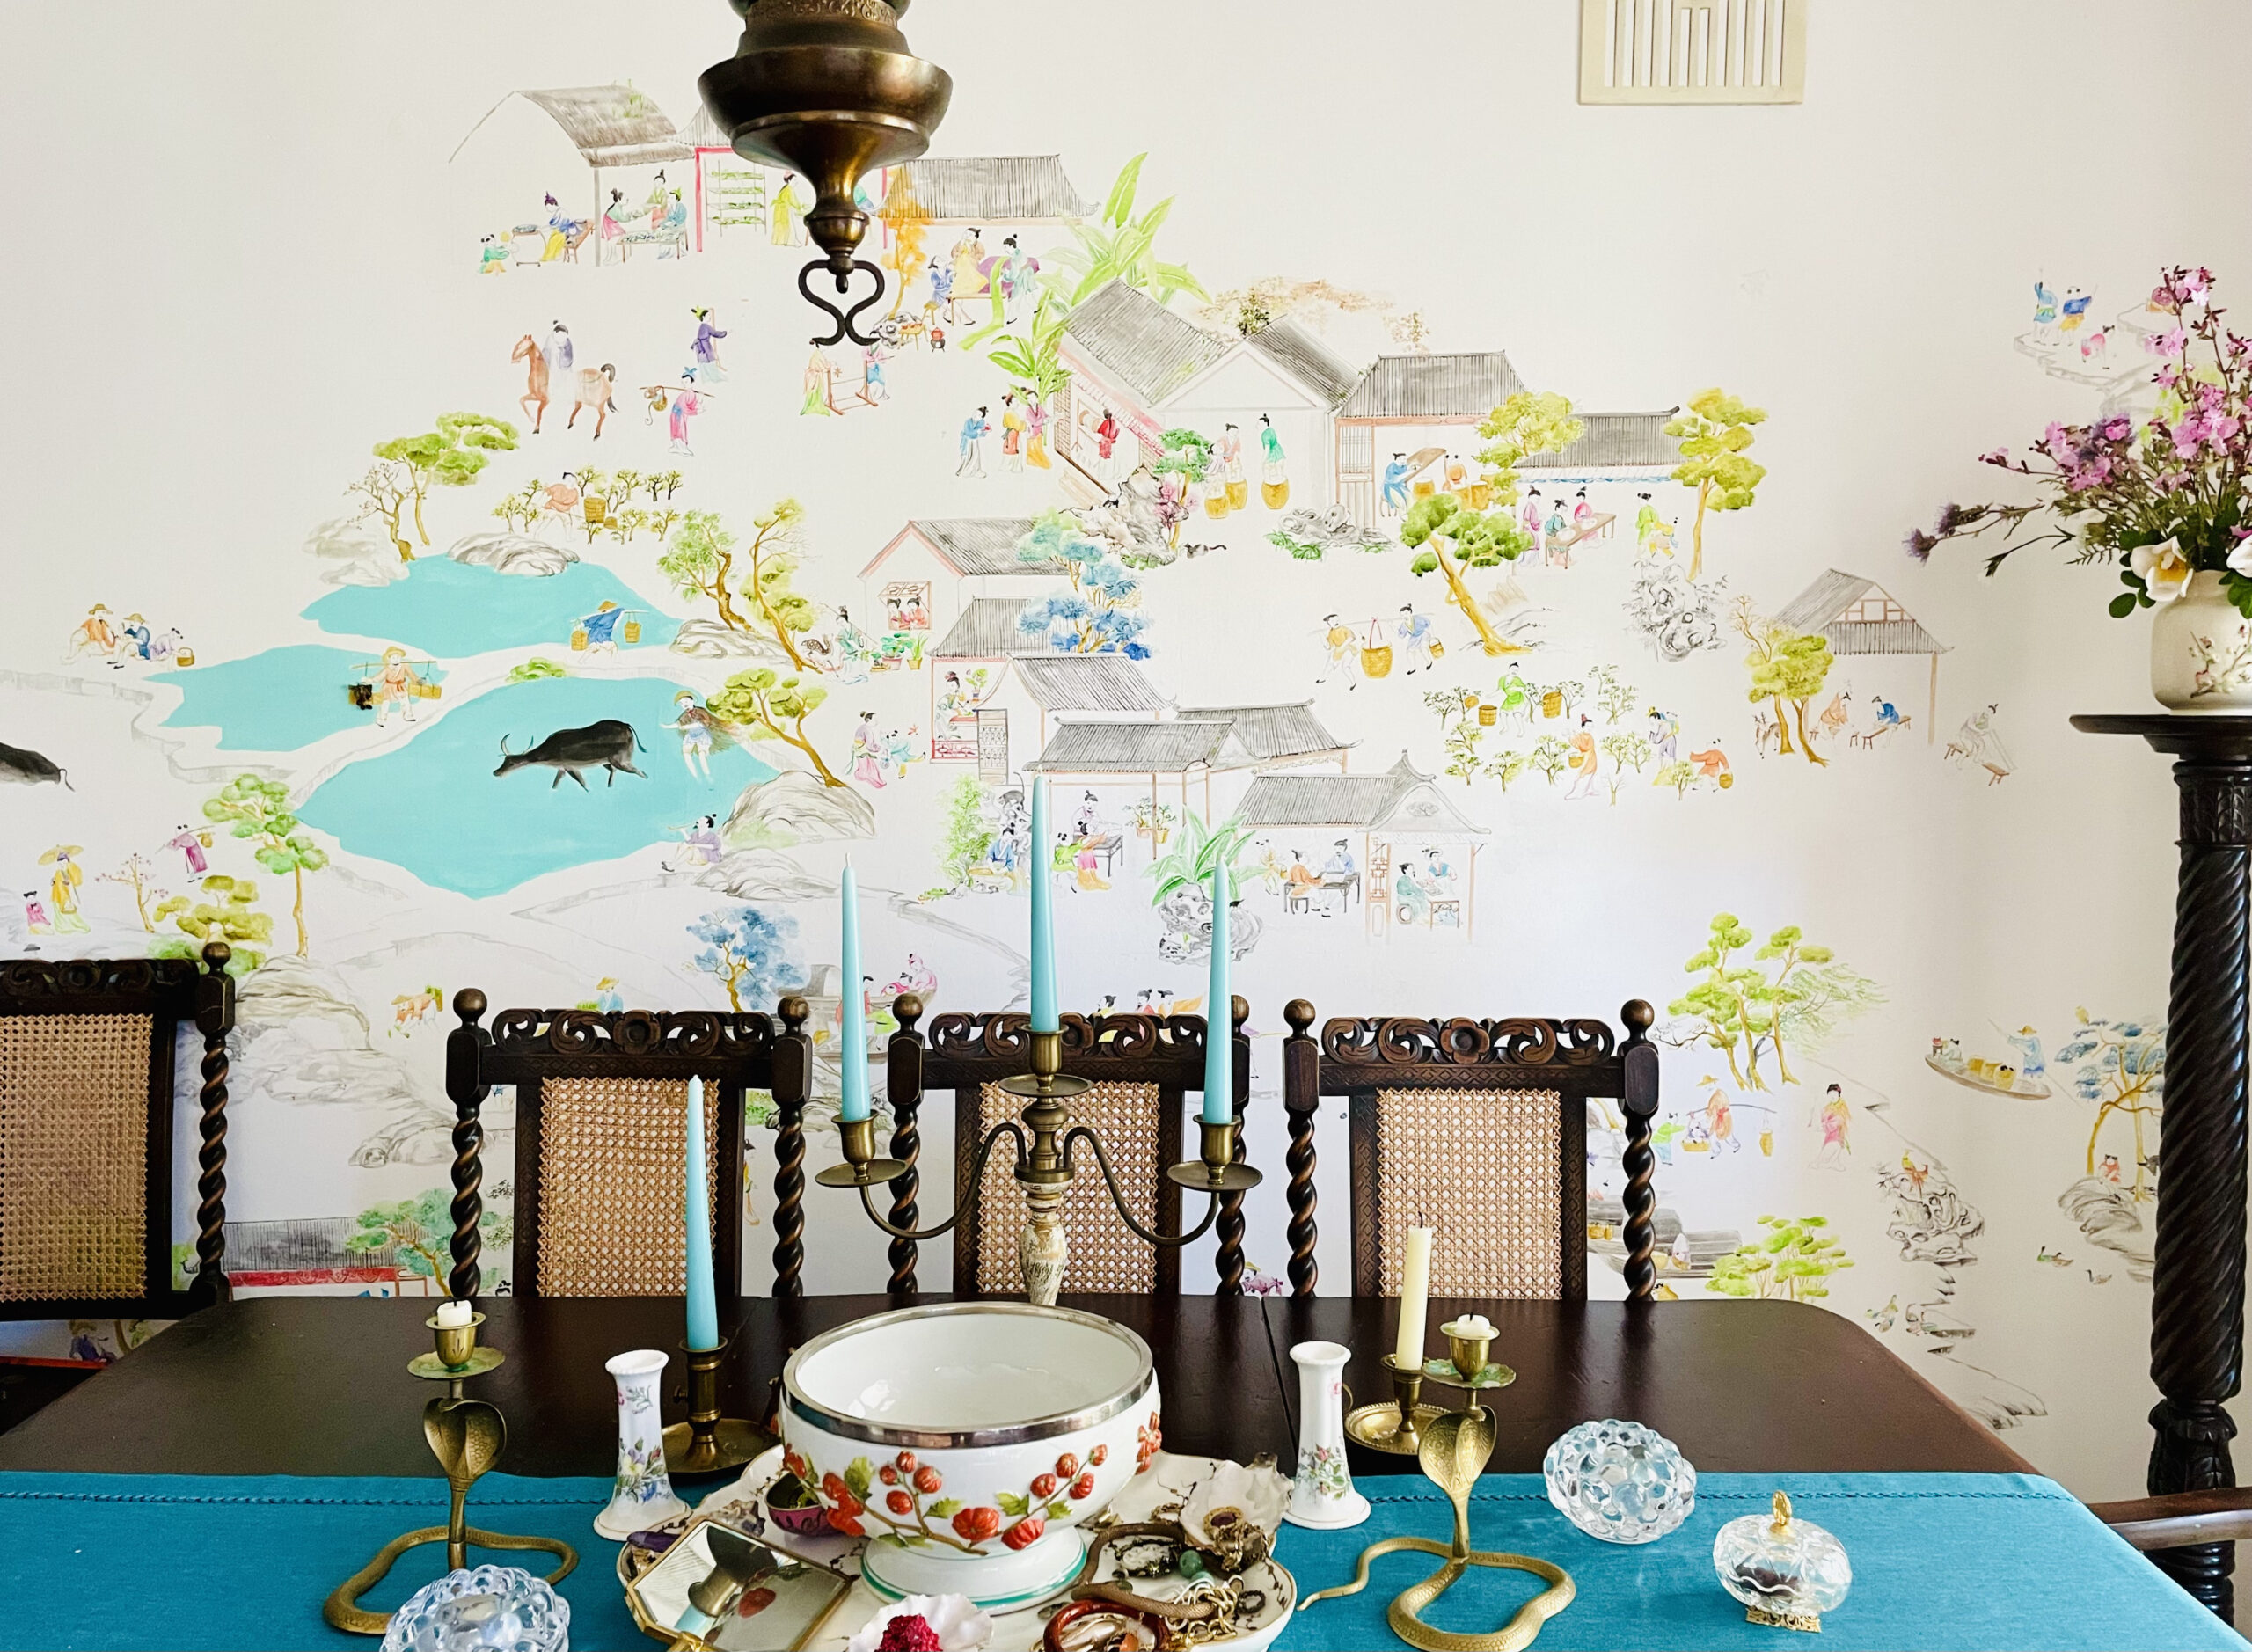 Yu Rong's chinoiserie wall painting 